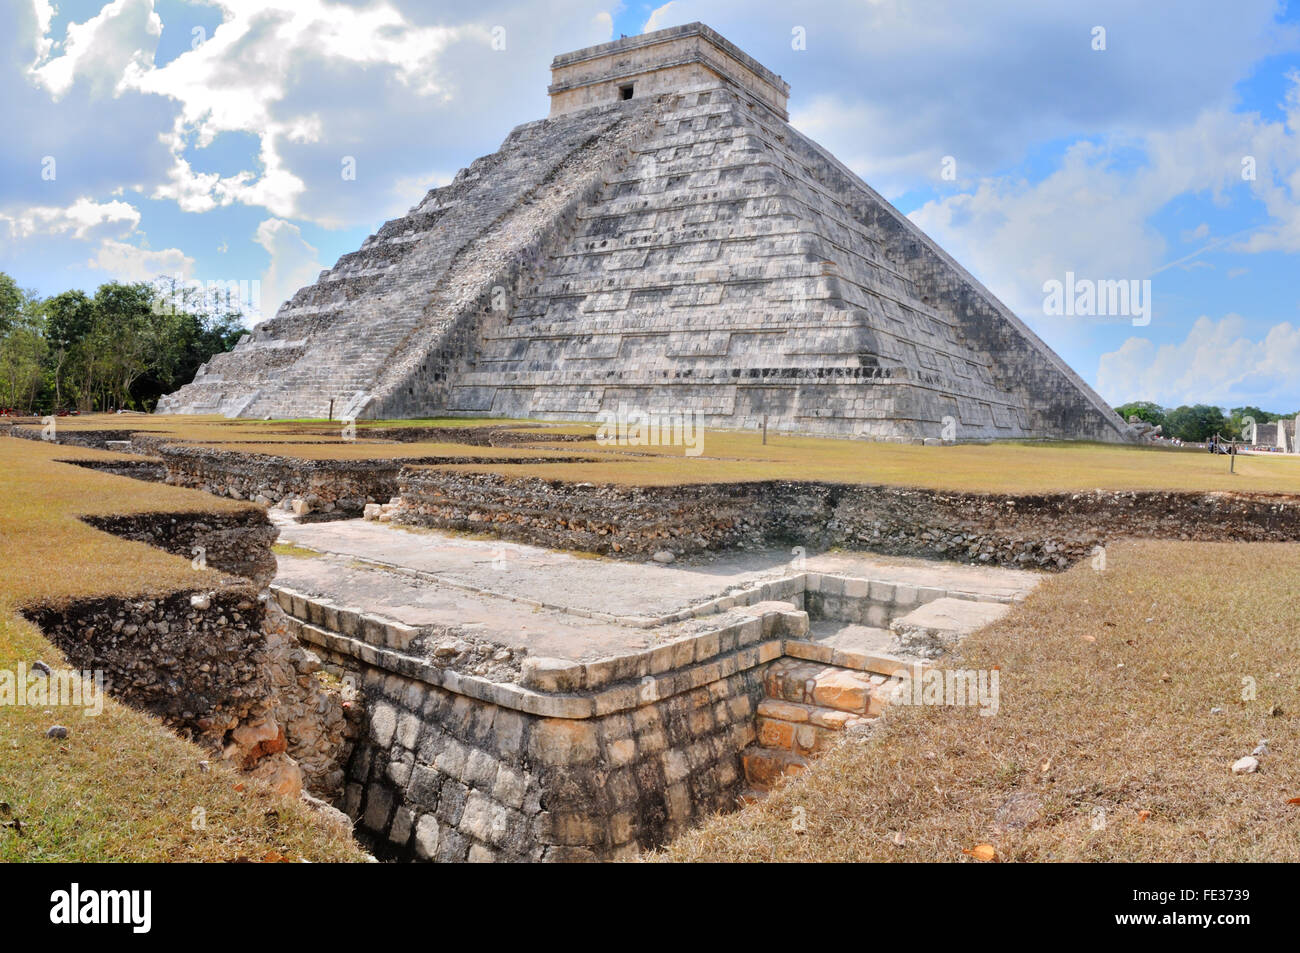 Maya pyramid in Chichen Itza, Yucatan, Mexico with an archaeological dig in front Stock Photo